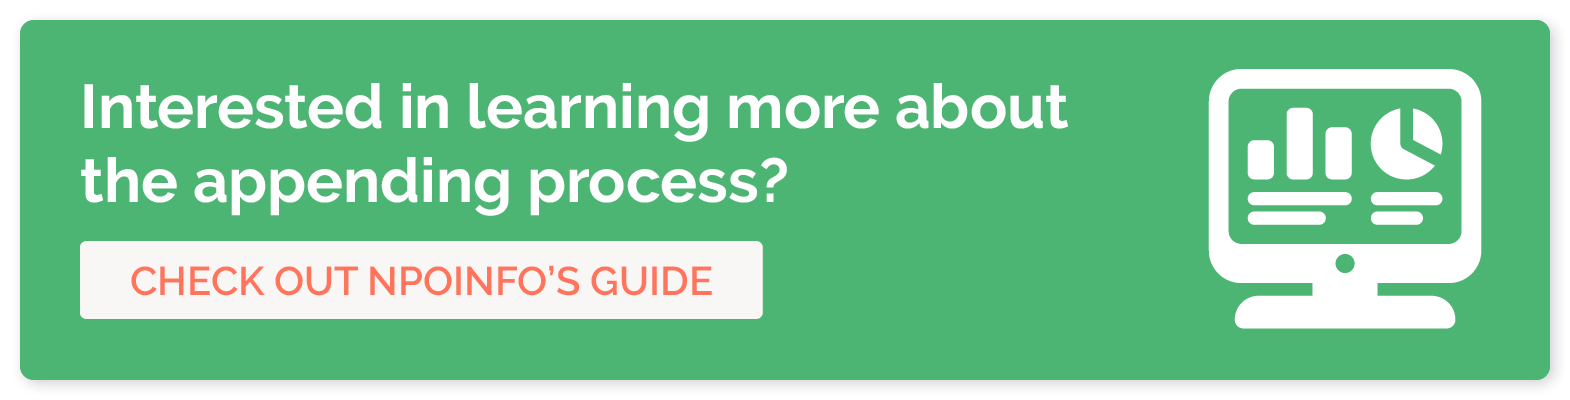 Interested in learning more about the appending process? Check out NPOInfo's Guide